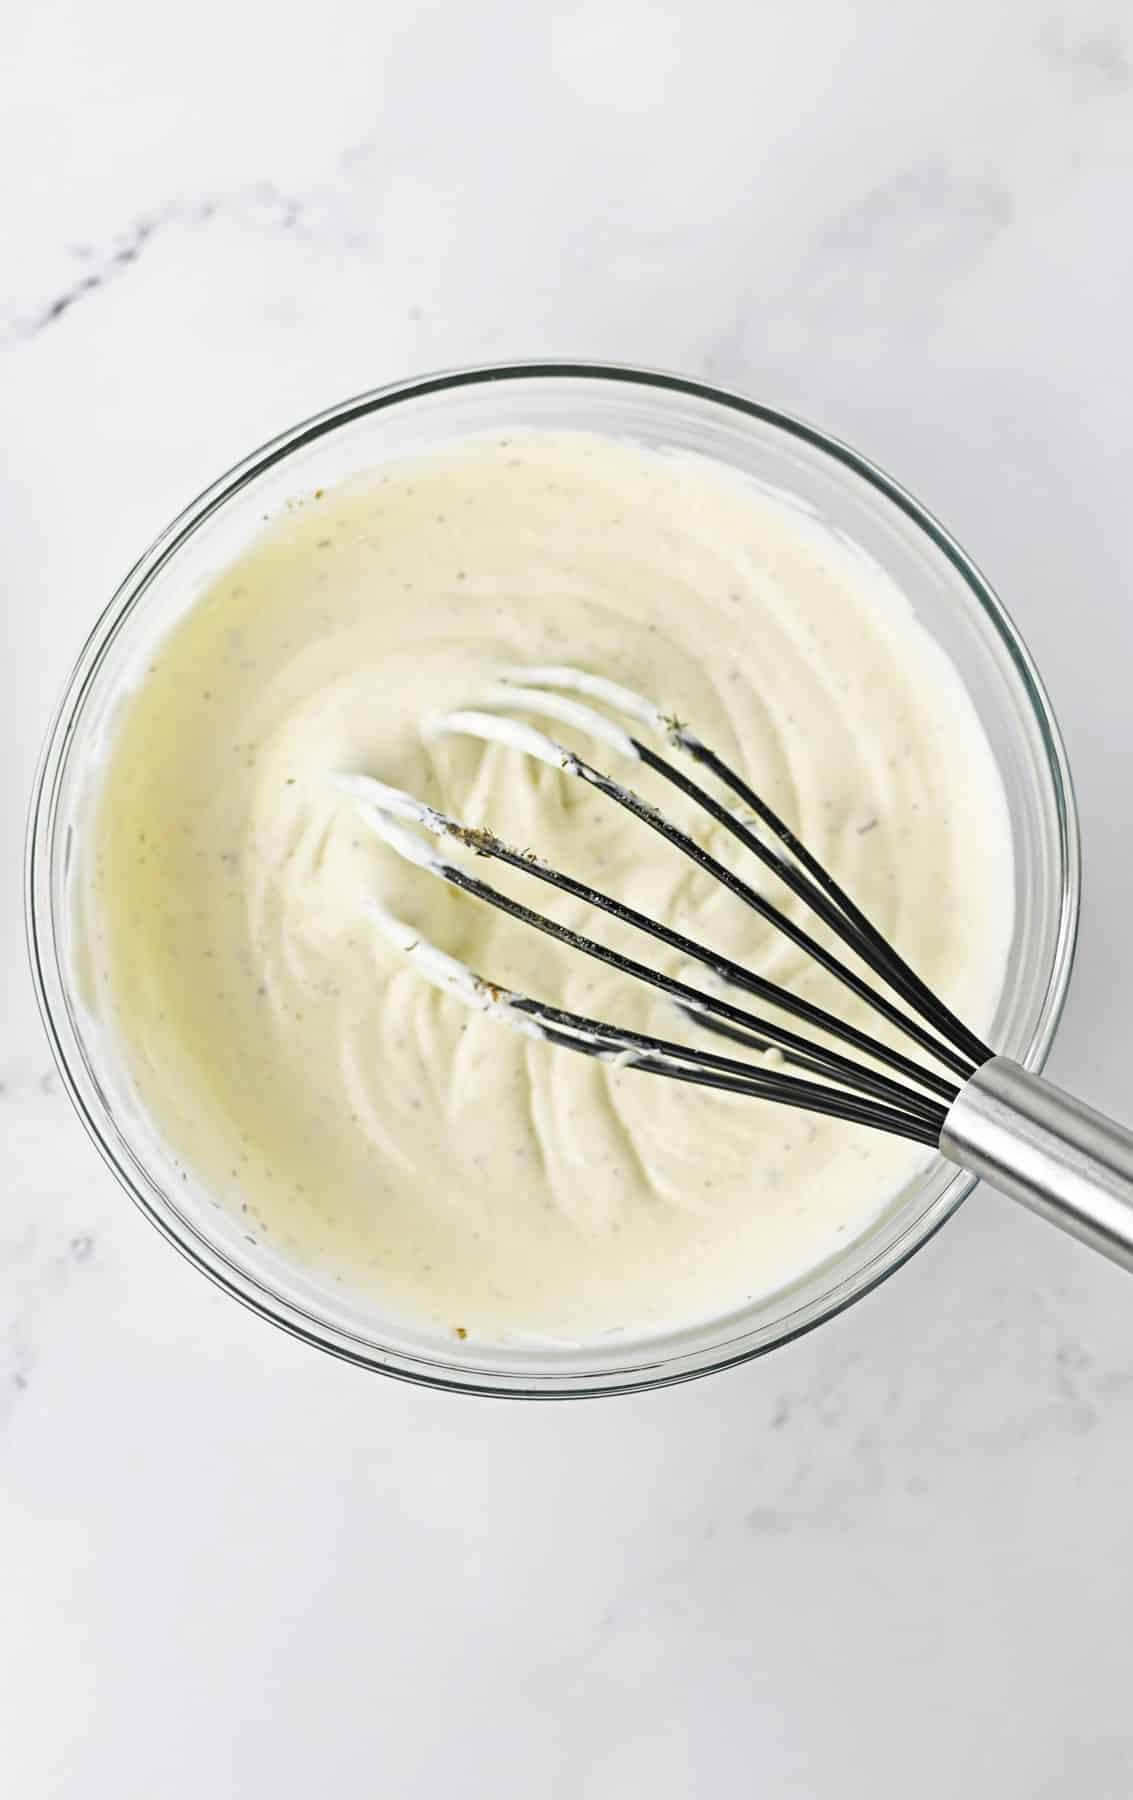 mayonnaise mixture in glass bowl with whisk